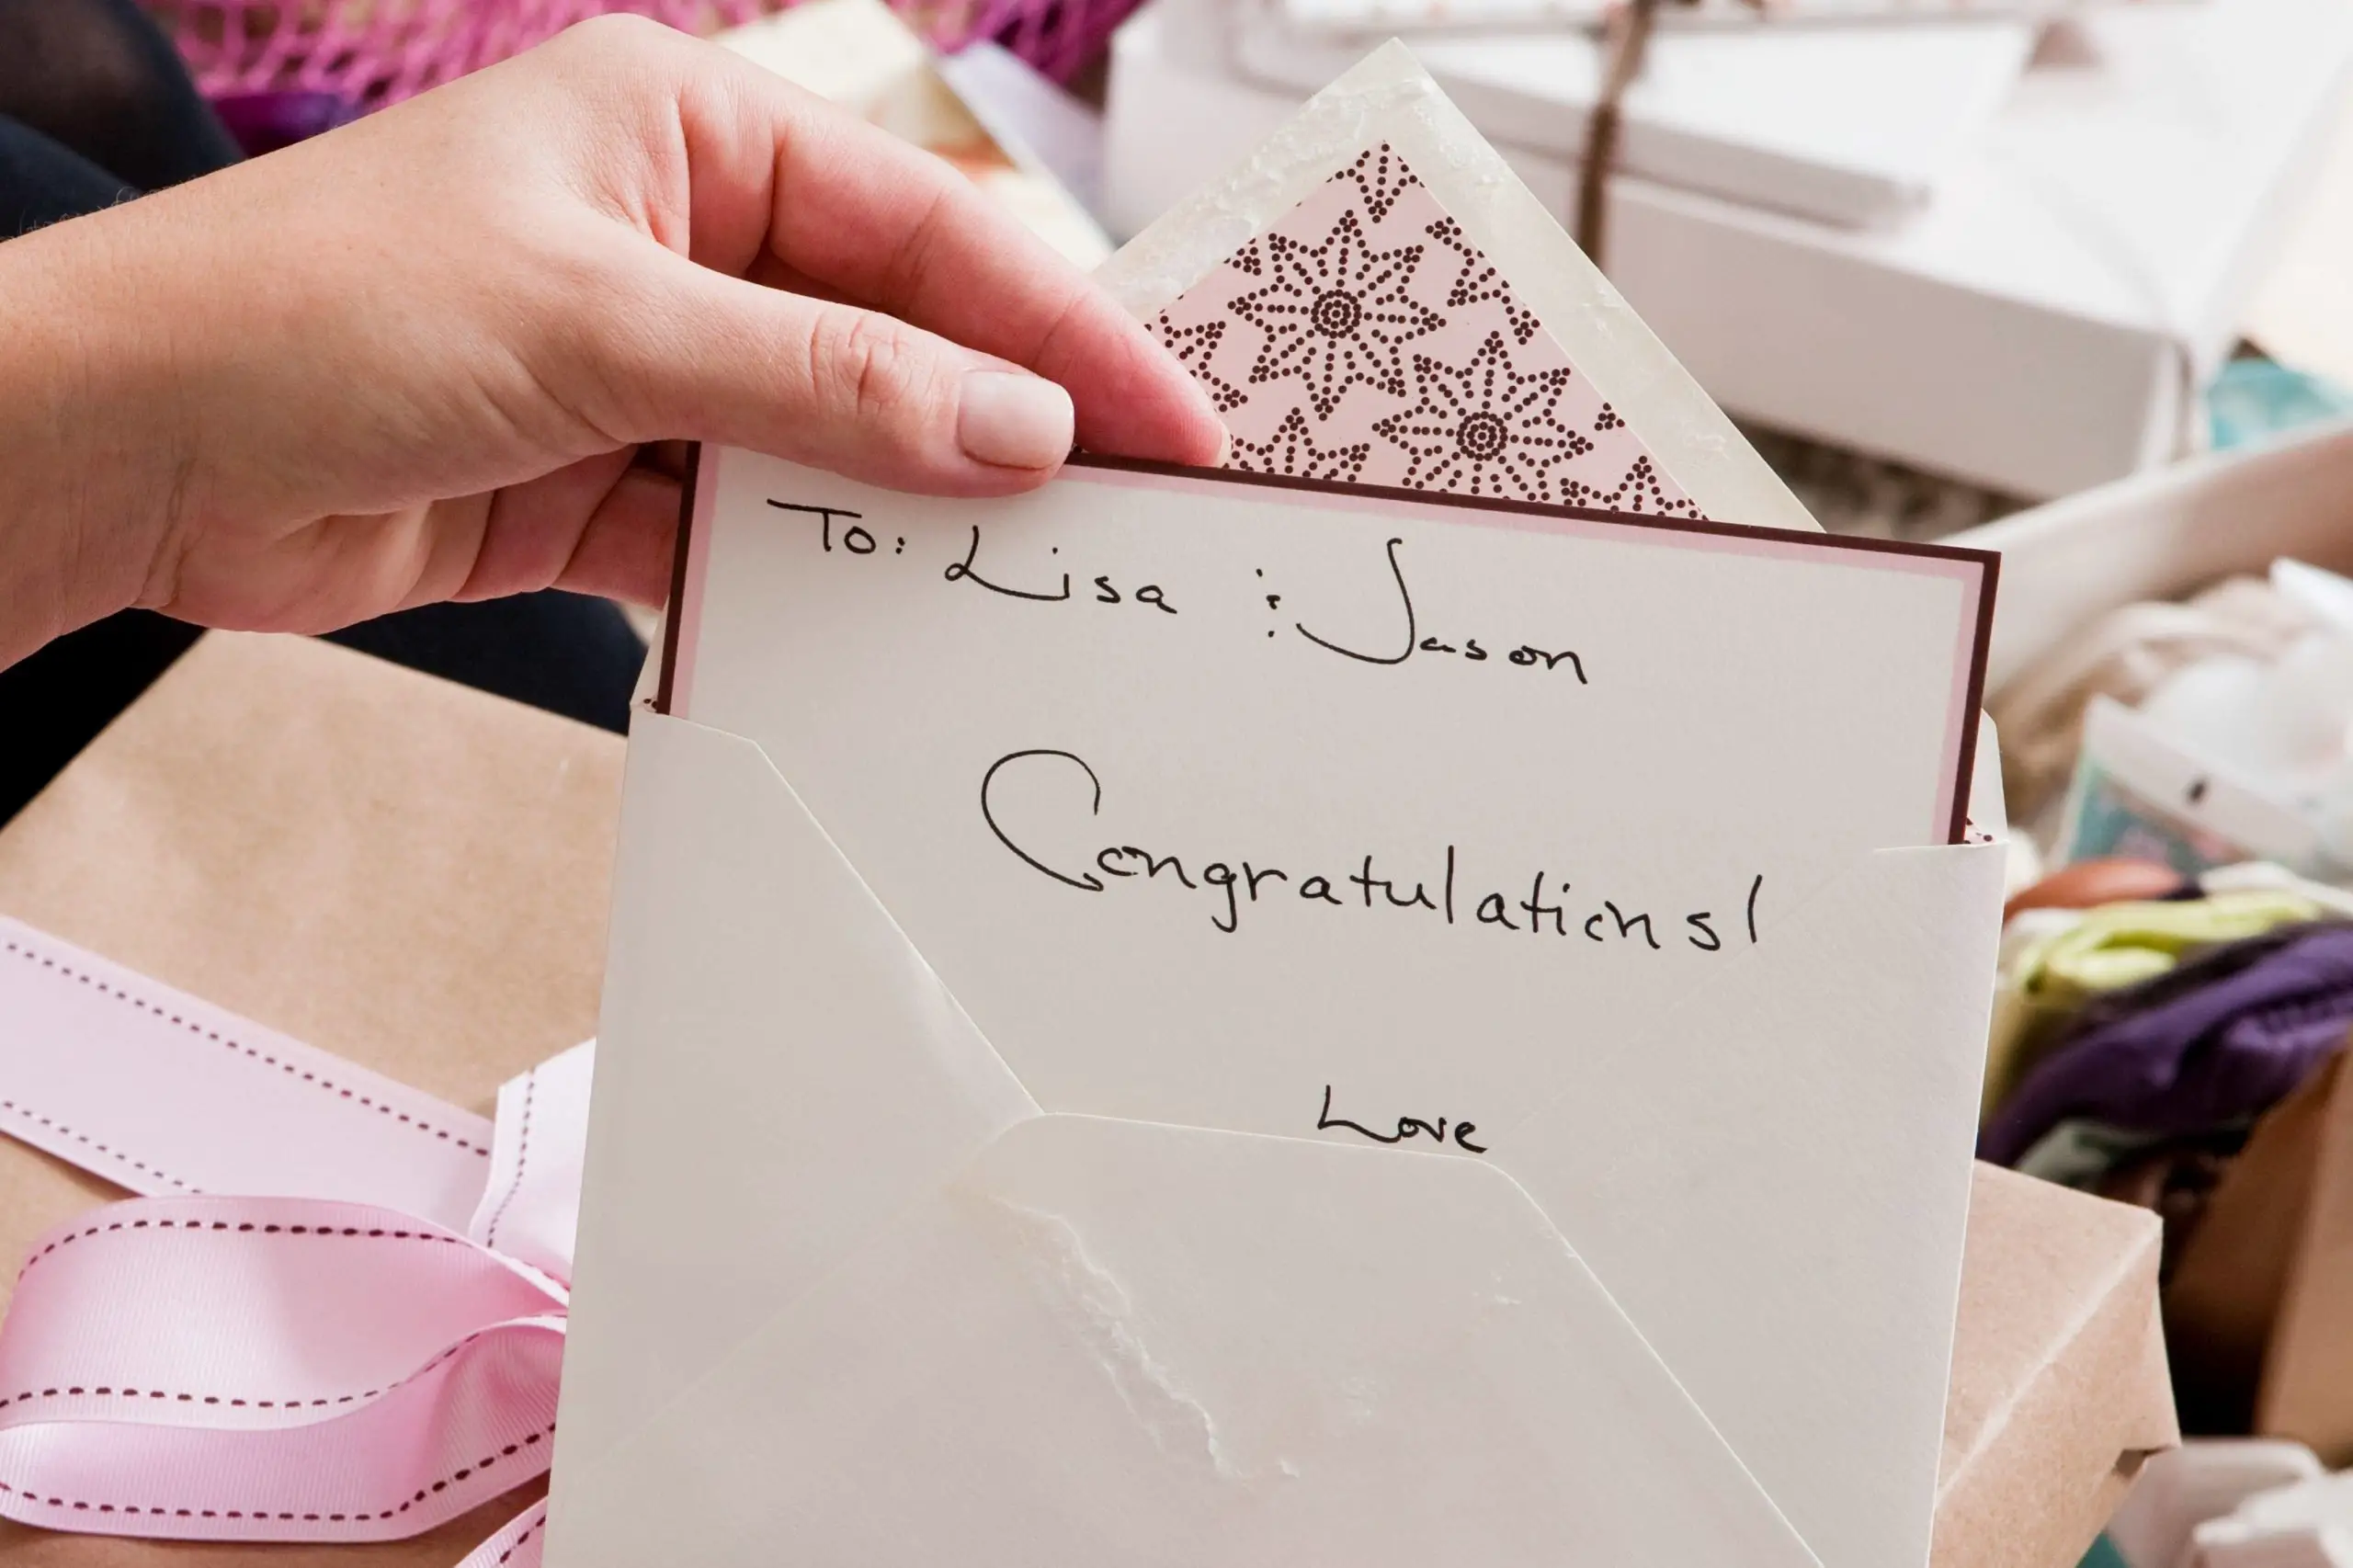 33 Things to Write in a Wedding Card If Youâre Not Sure ...